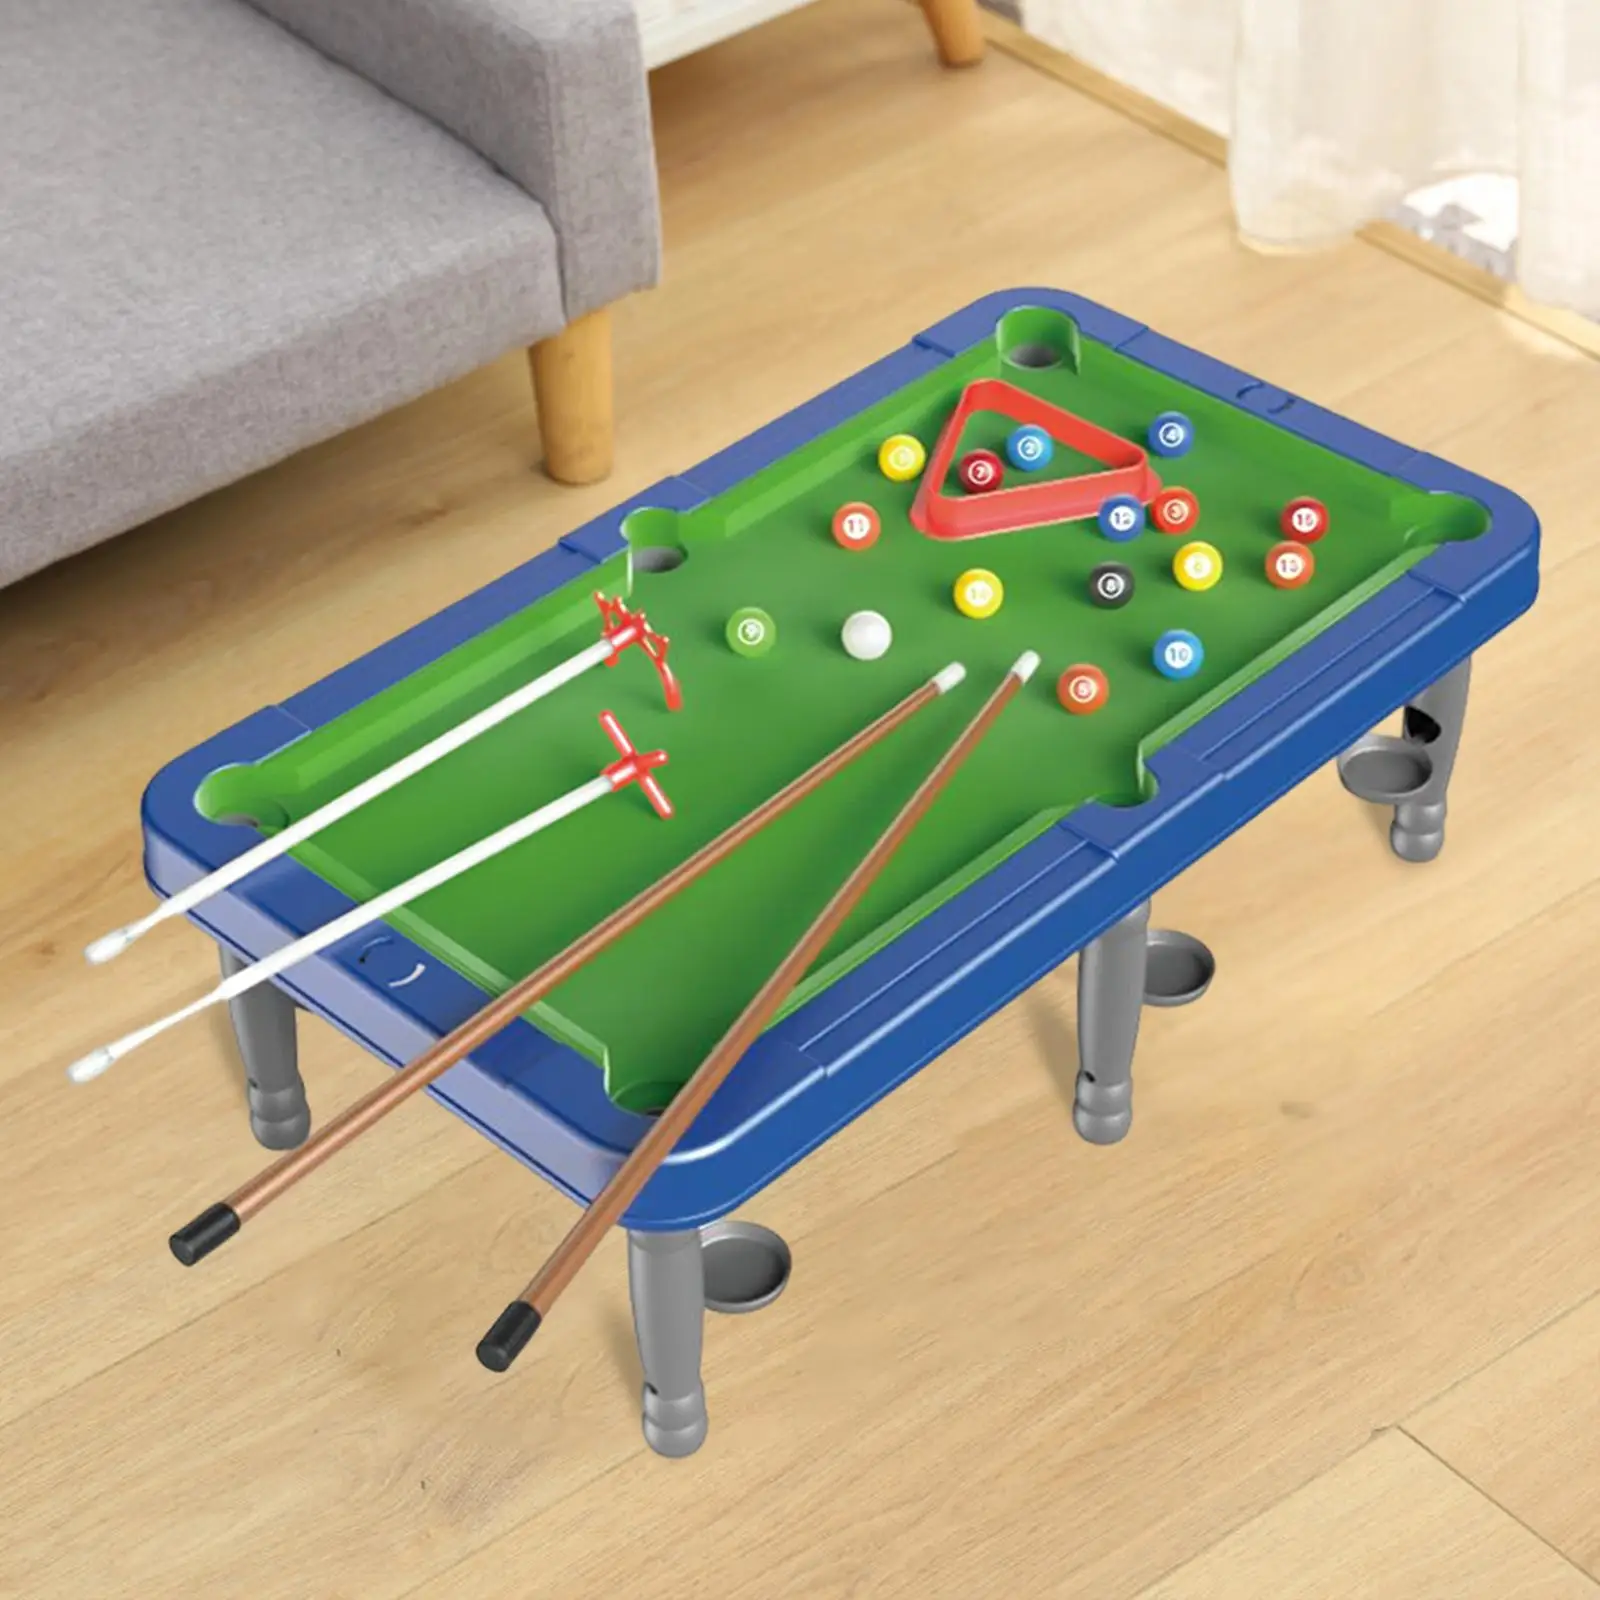 Portable Small Tabletop Billiards Office Use Desktop Bowling Game Toy Games Desktop Snooker Pool Table Set for Boys Girls